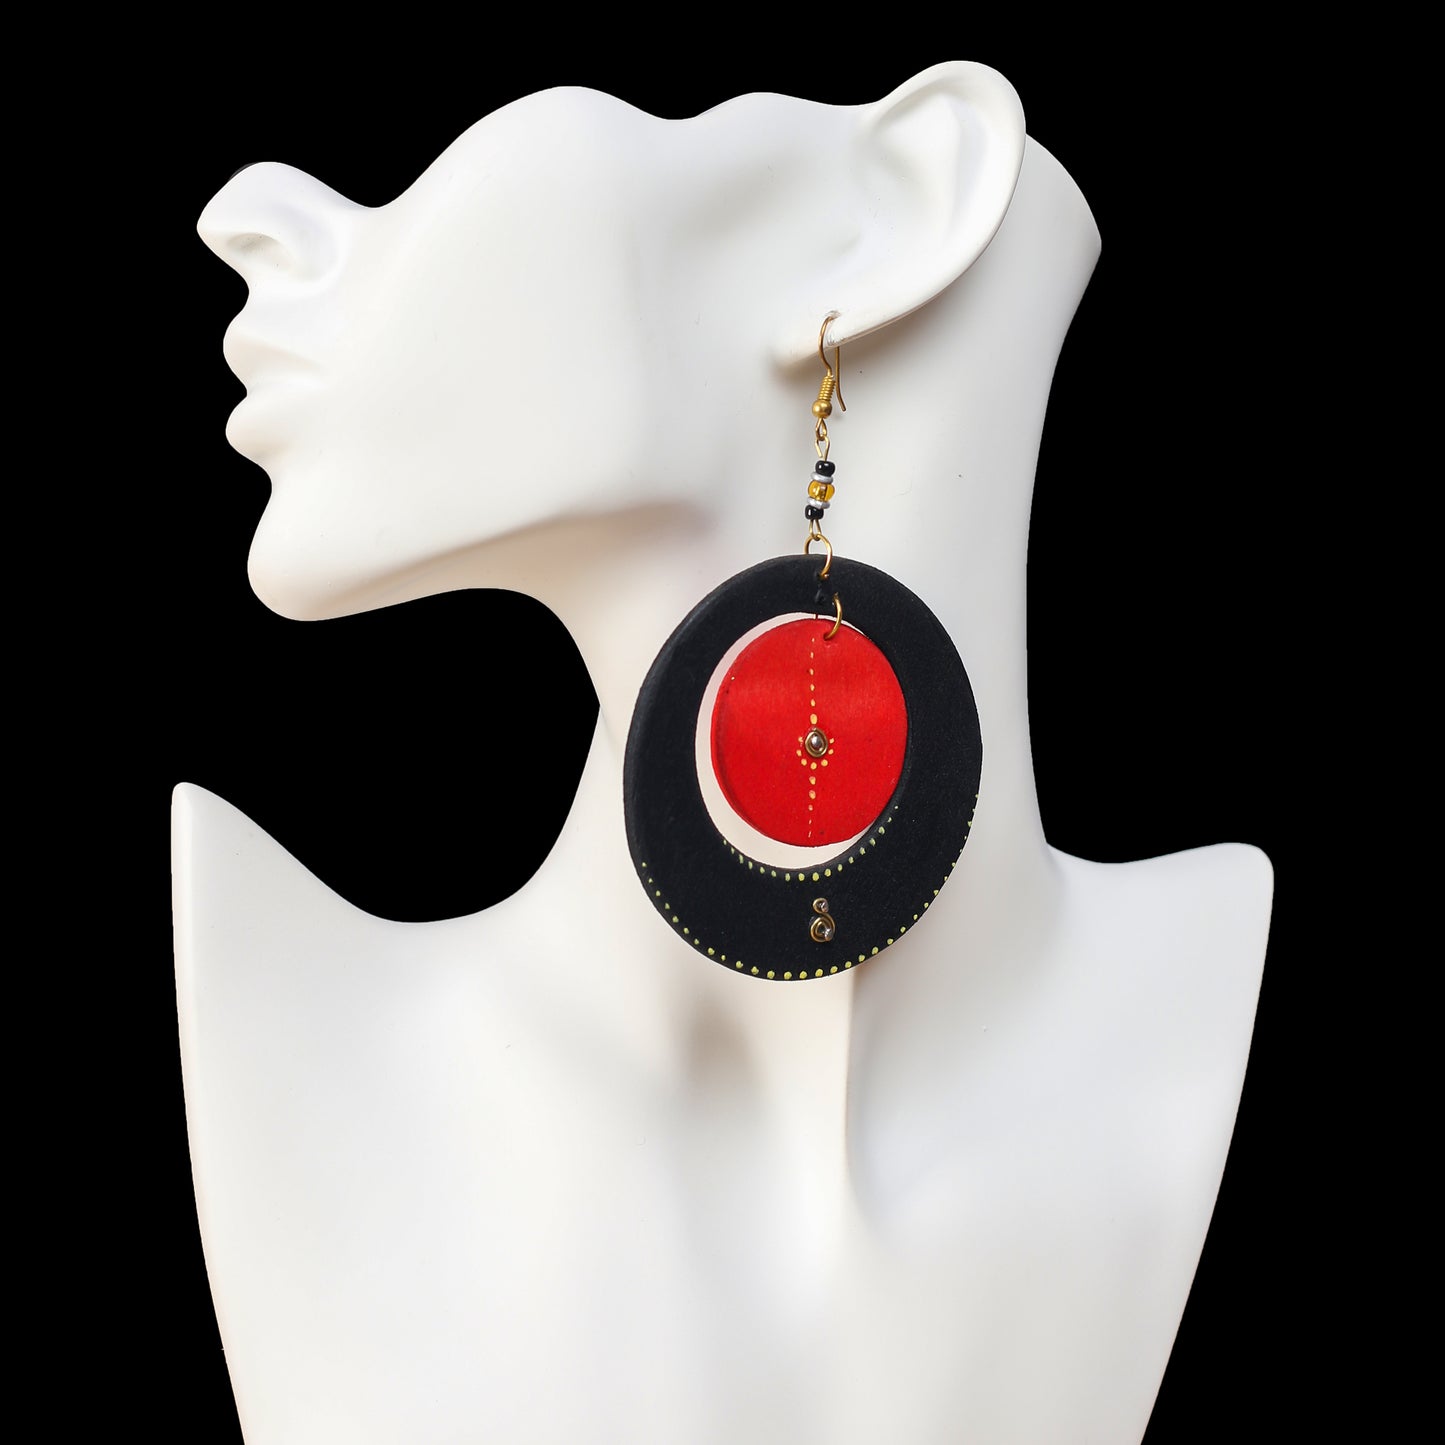 Round Black & Red Wooden Earrings